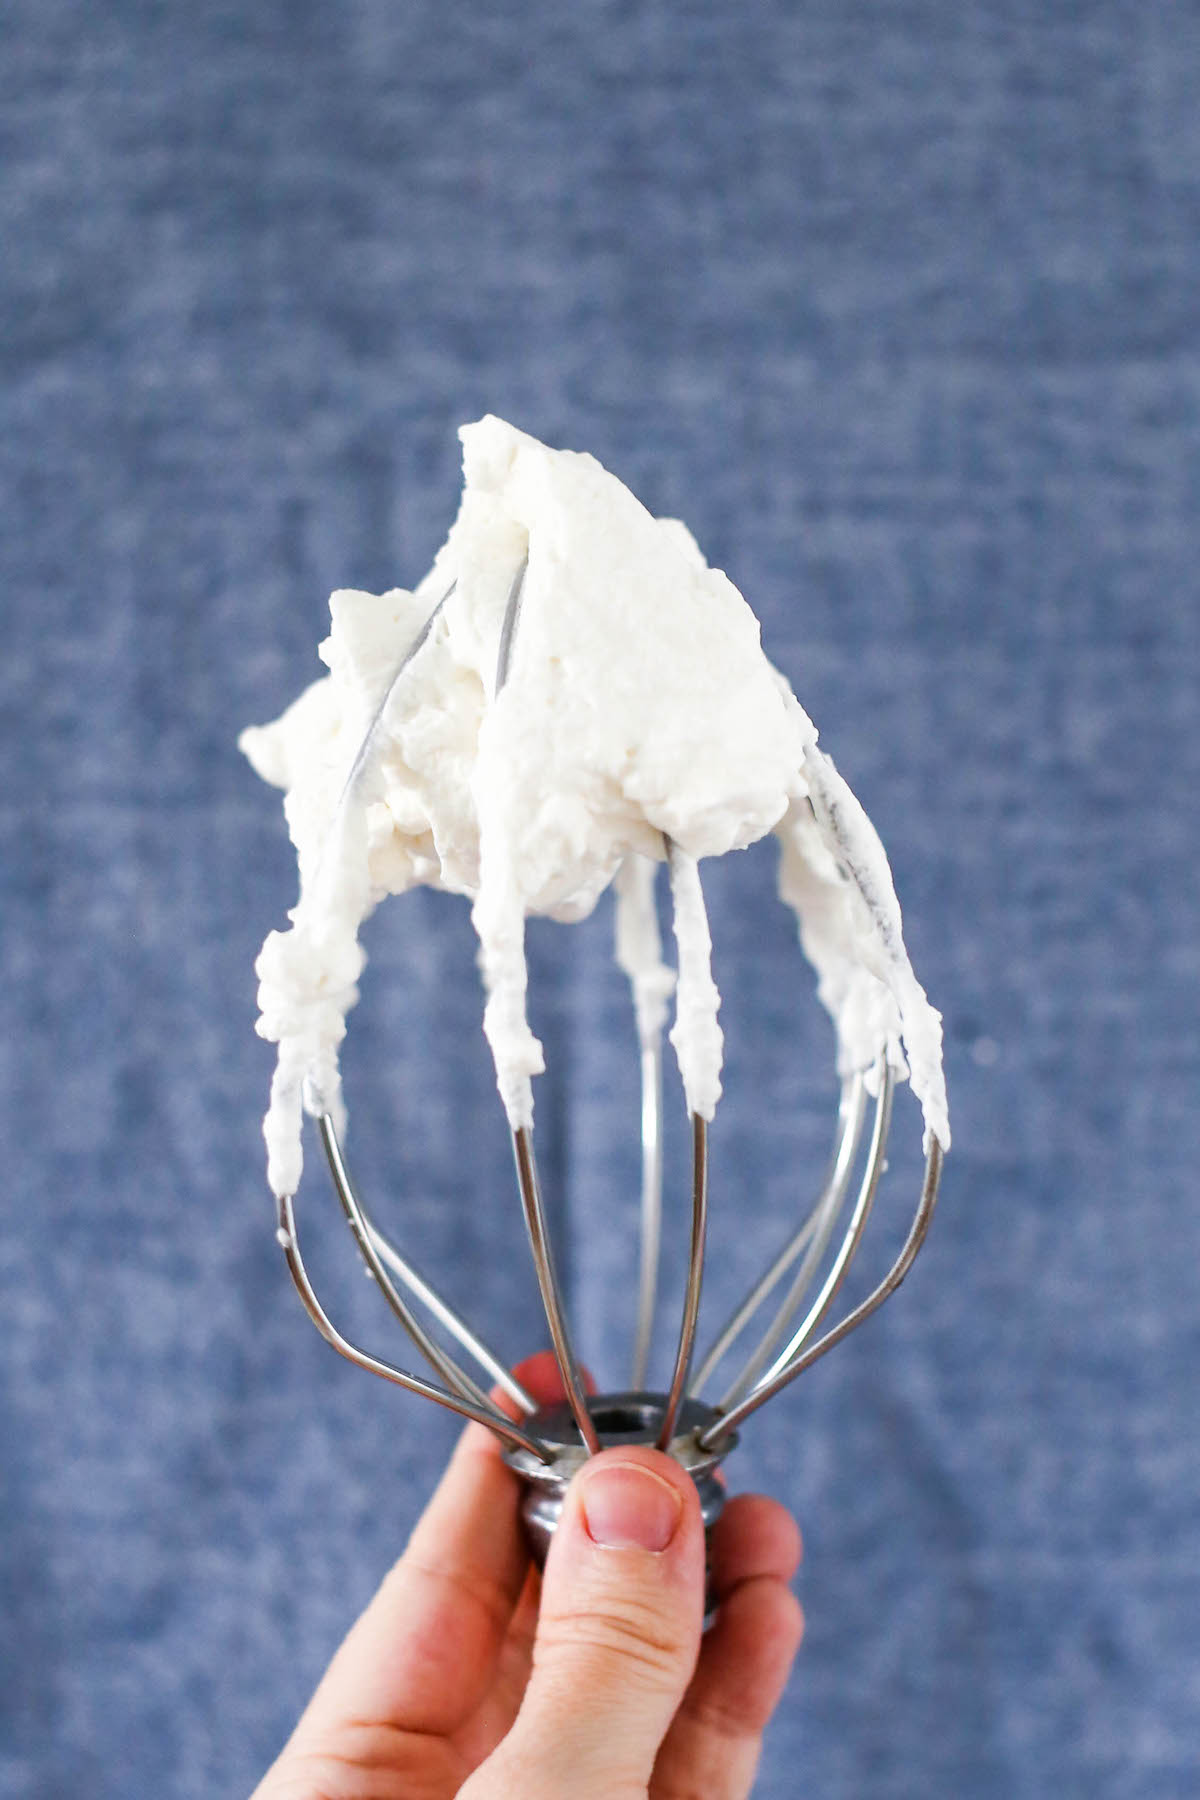 A KitchenAid mixer whisk attachment with whipped cream on it held in front of a dark blue background